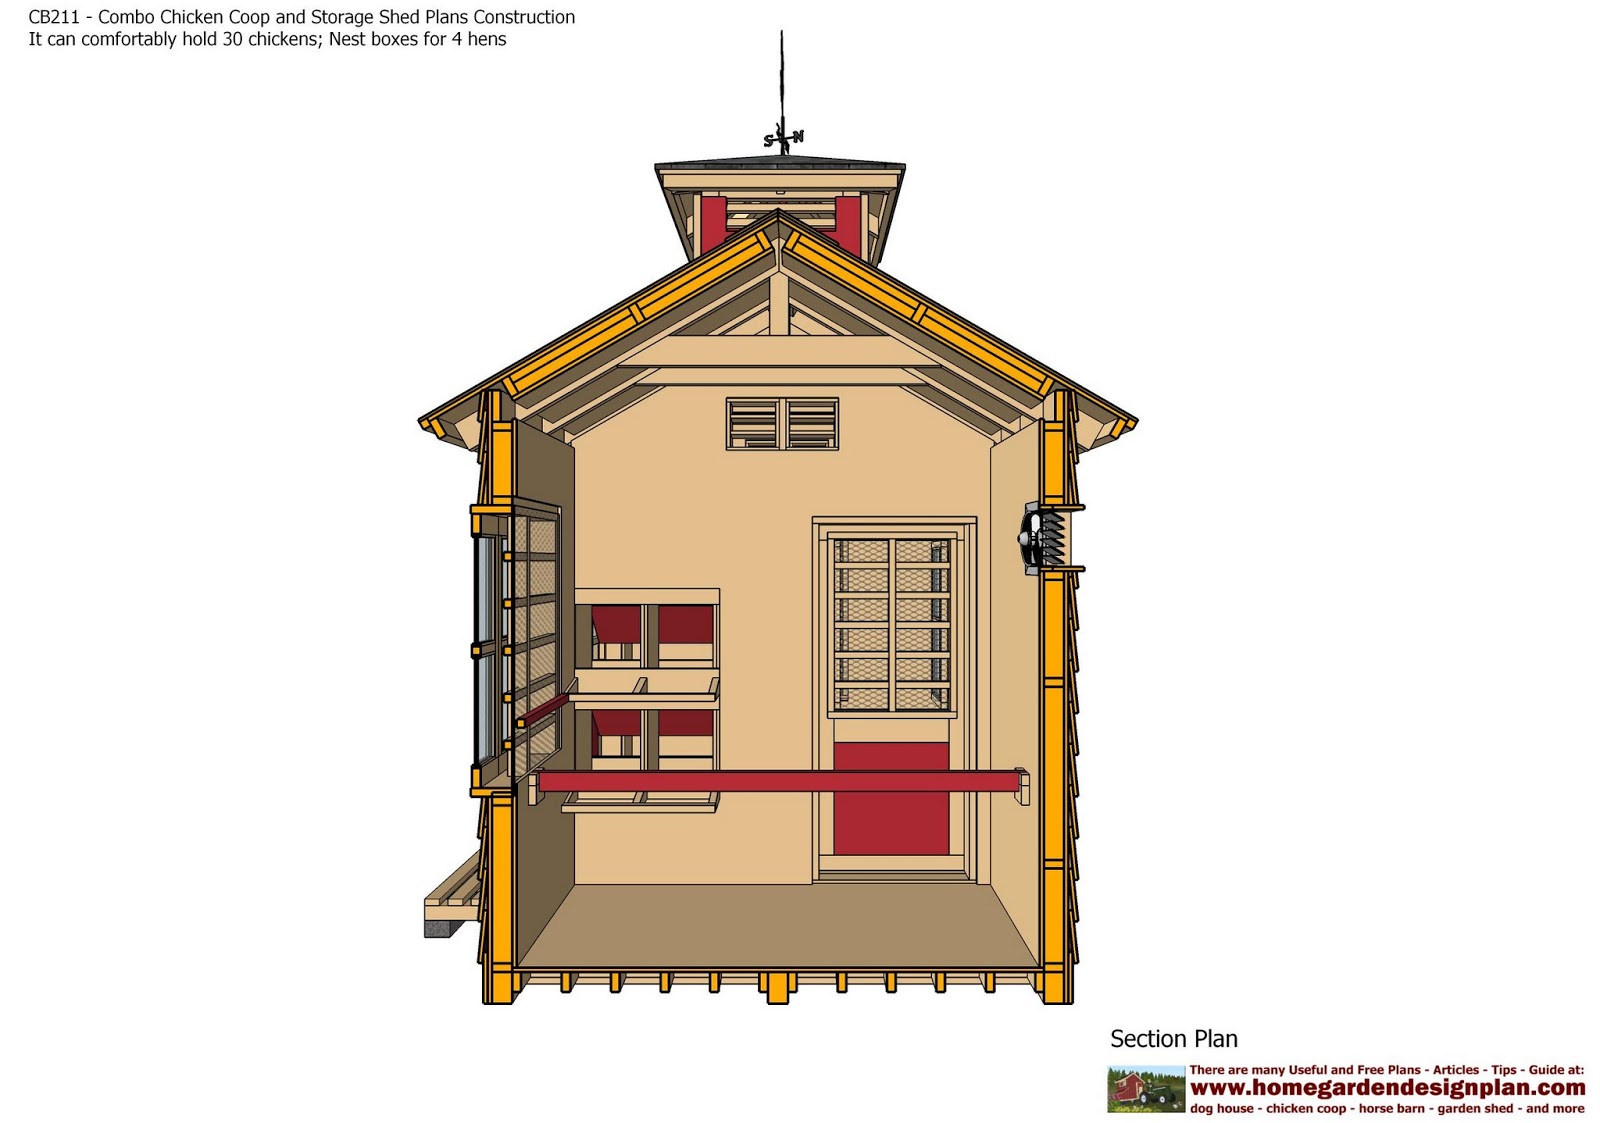  Shed Plans - Chicken Coop Plans - Storage Shed Plans Construction